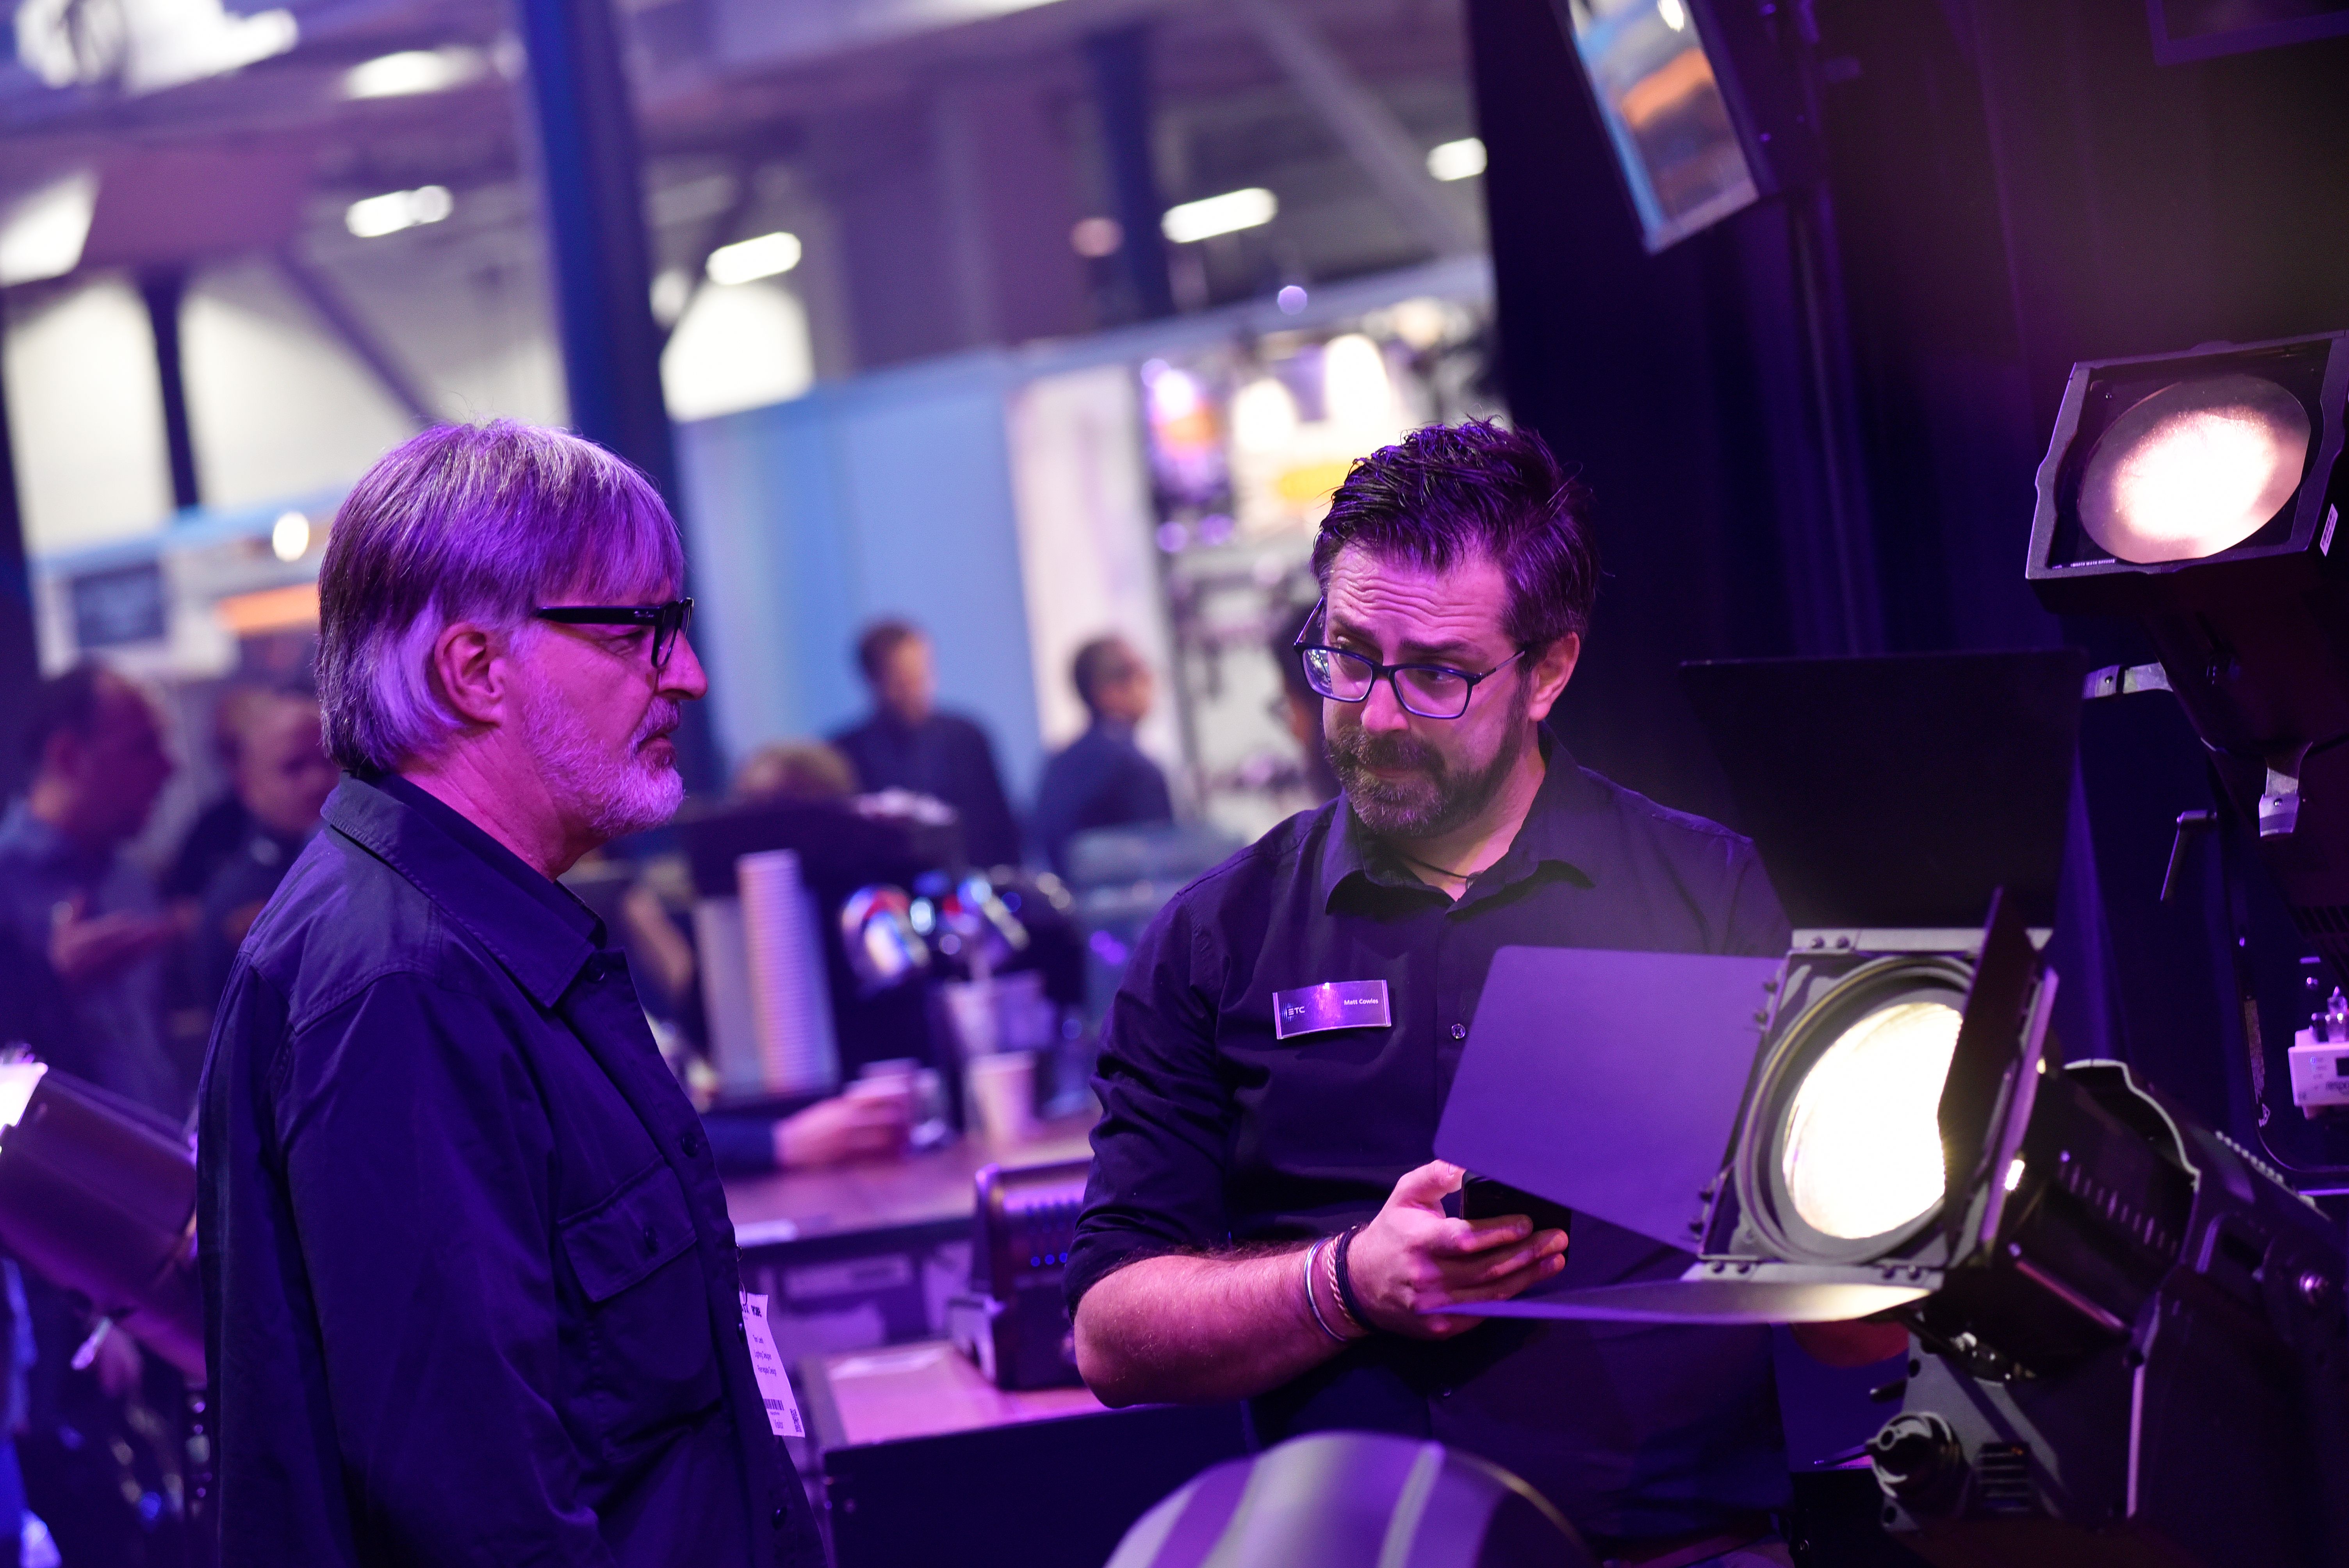 A Chauvet Professional representative speaking with a potential customer about stage lighting fixtures